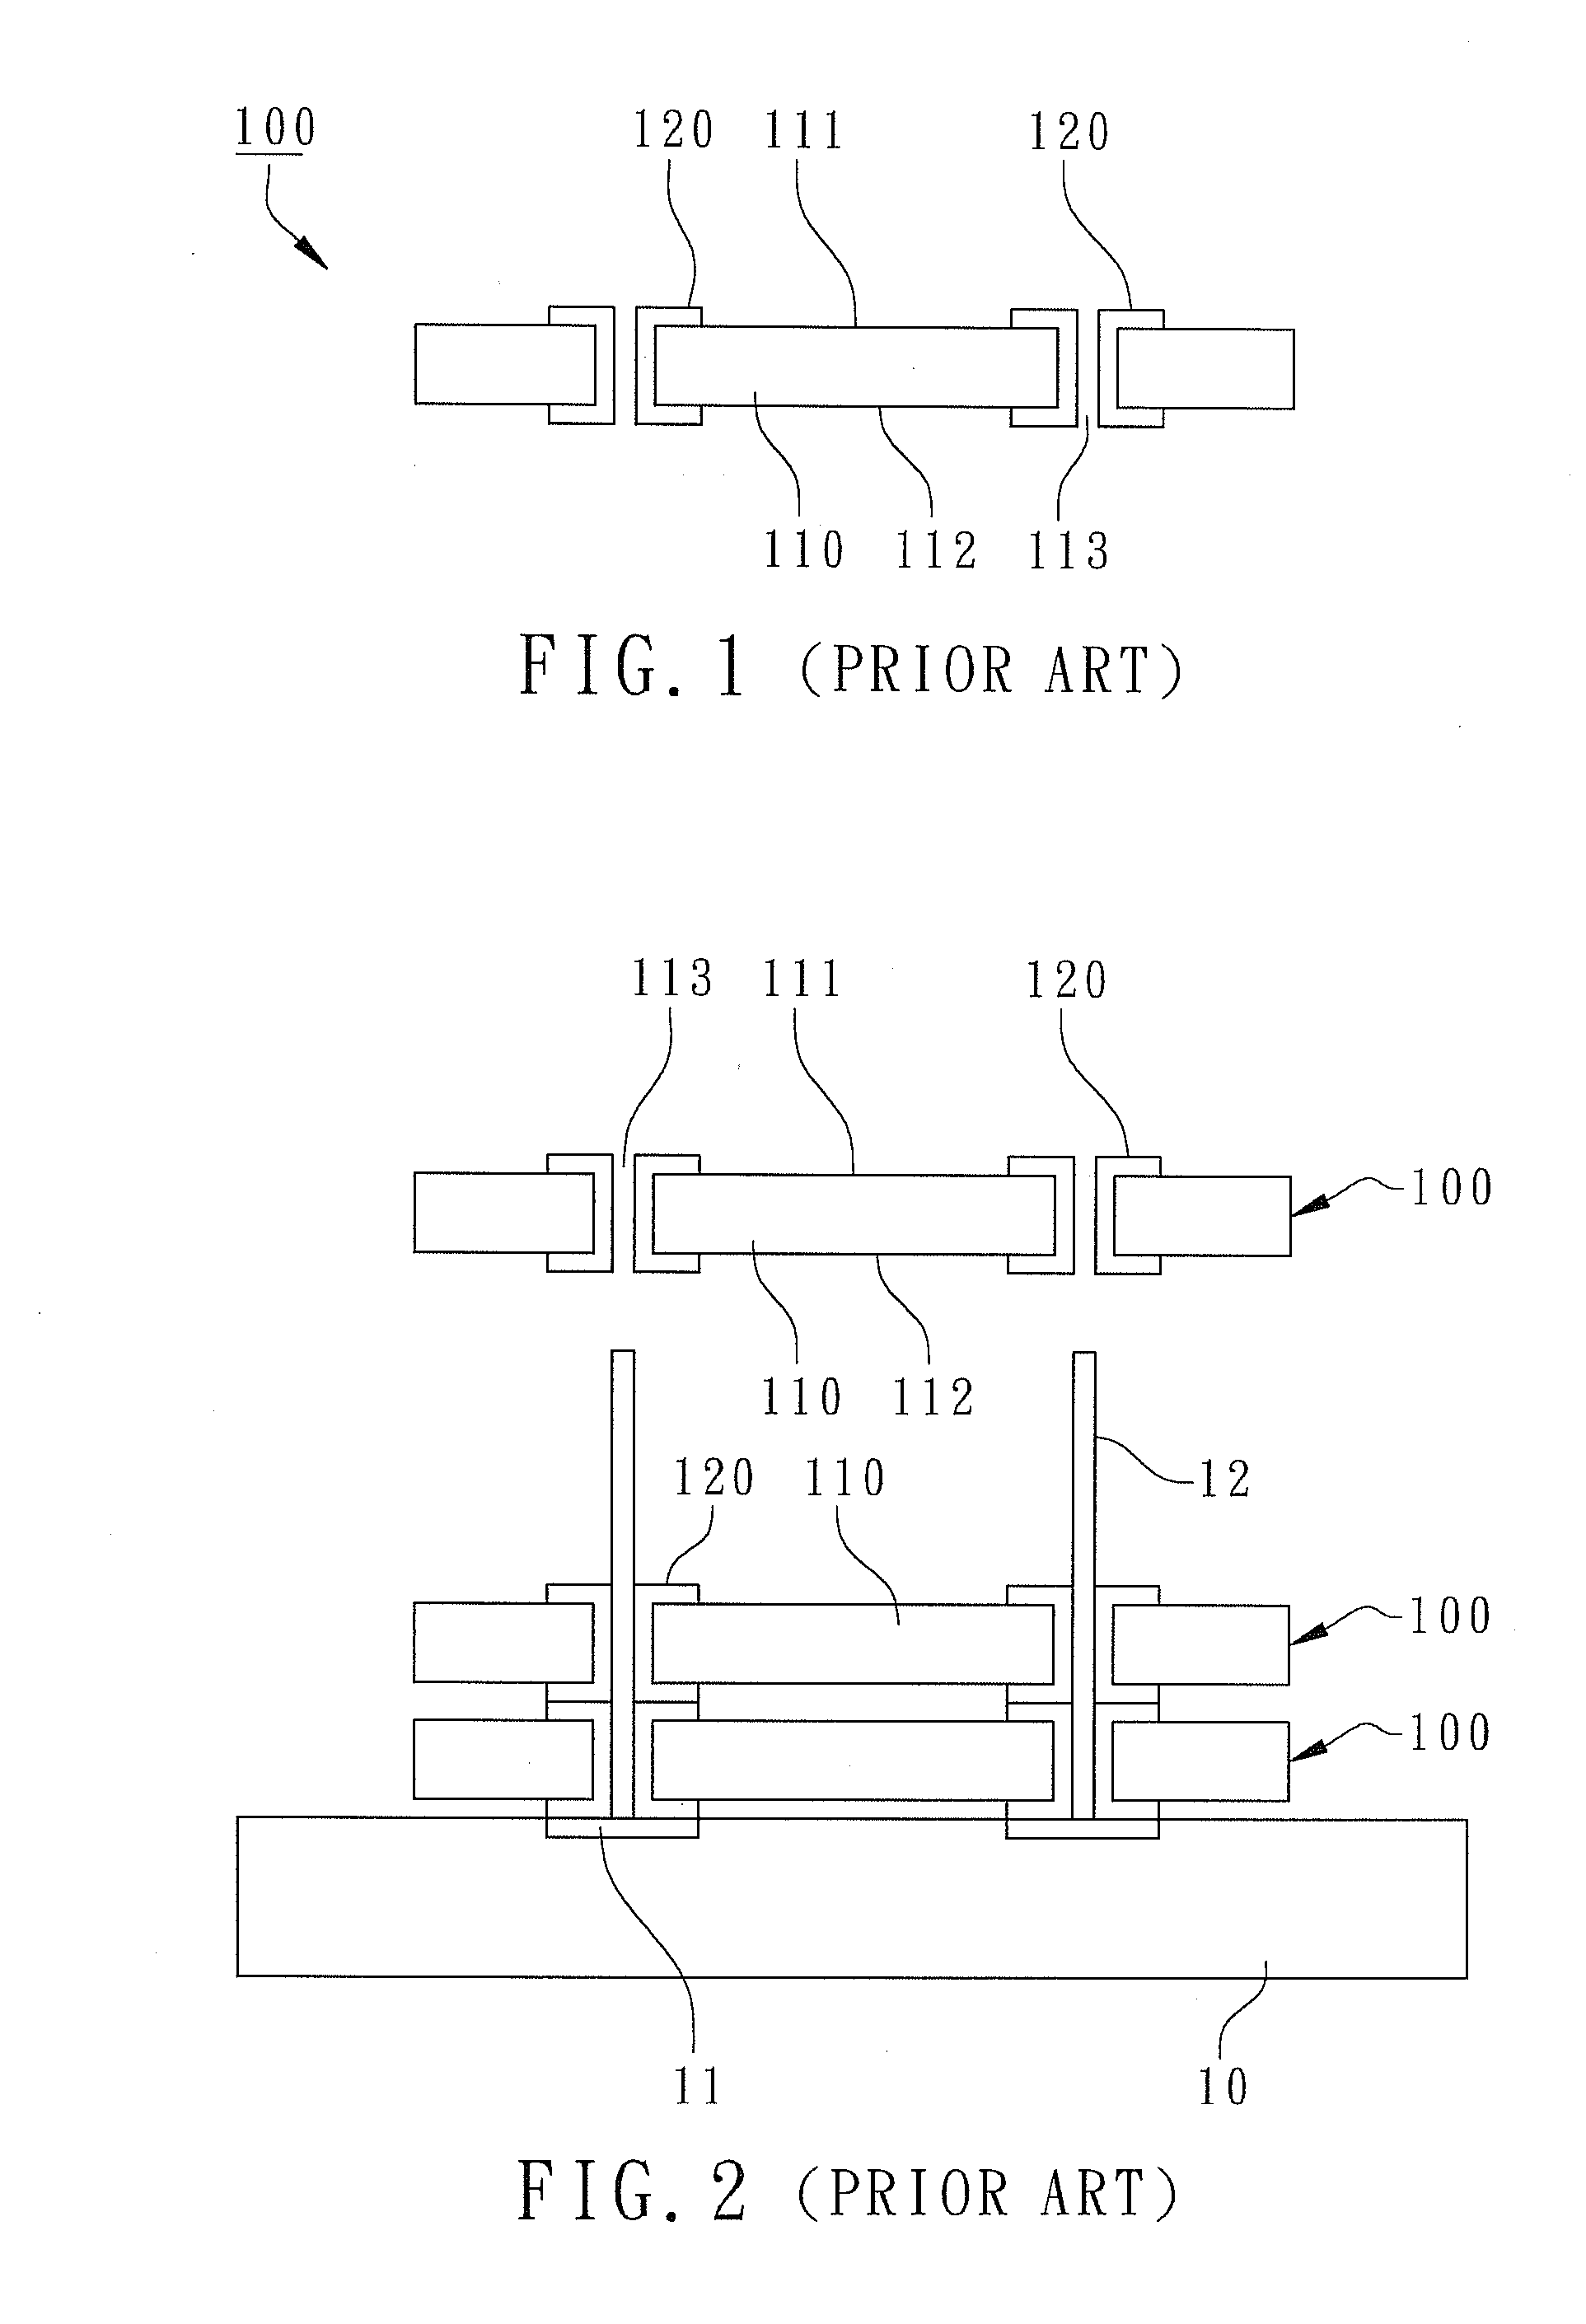 Semiconductor chip having TSV (through silicon via) and stacked assembly including the chips